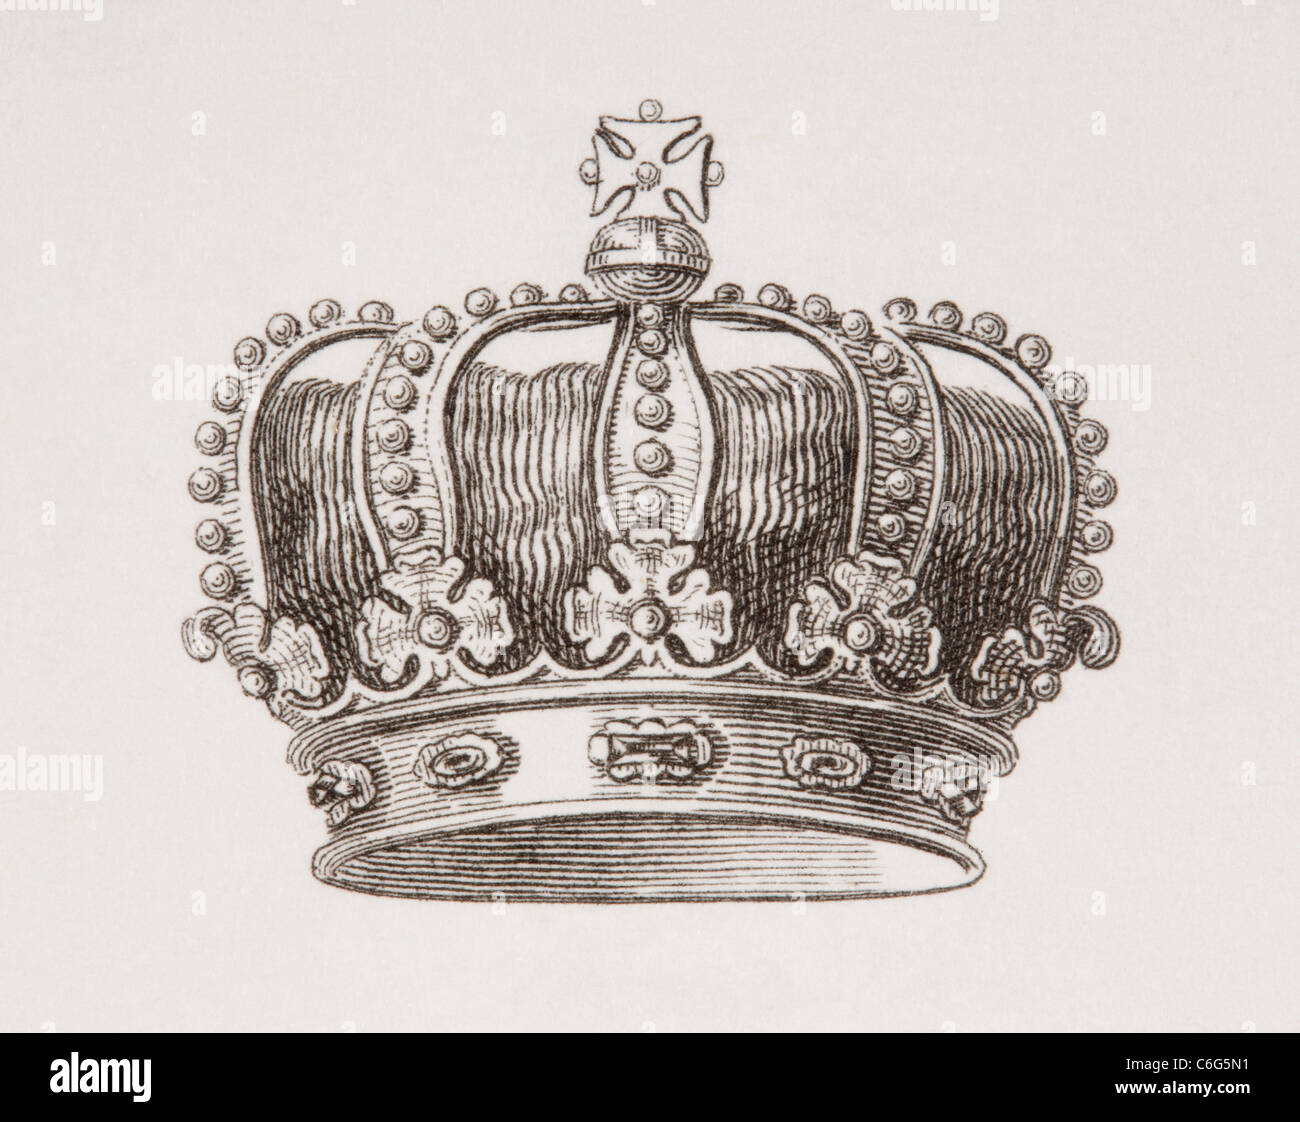 Crown of the Kingdom of Denmark. Stock Photo